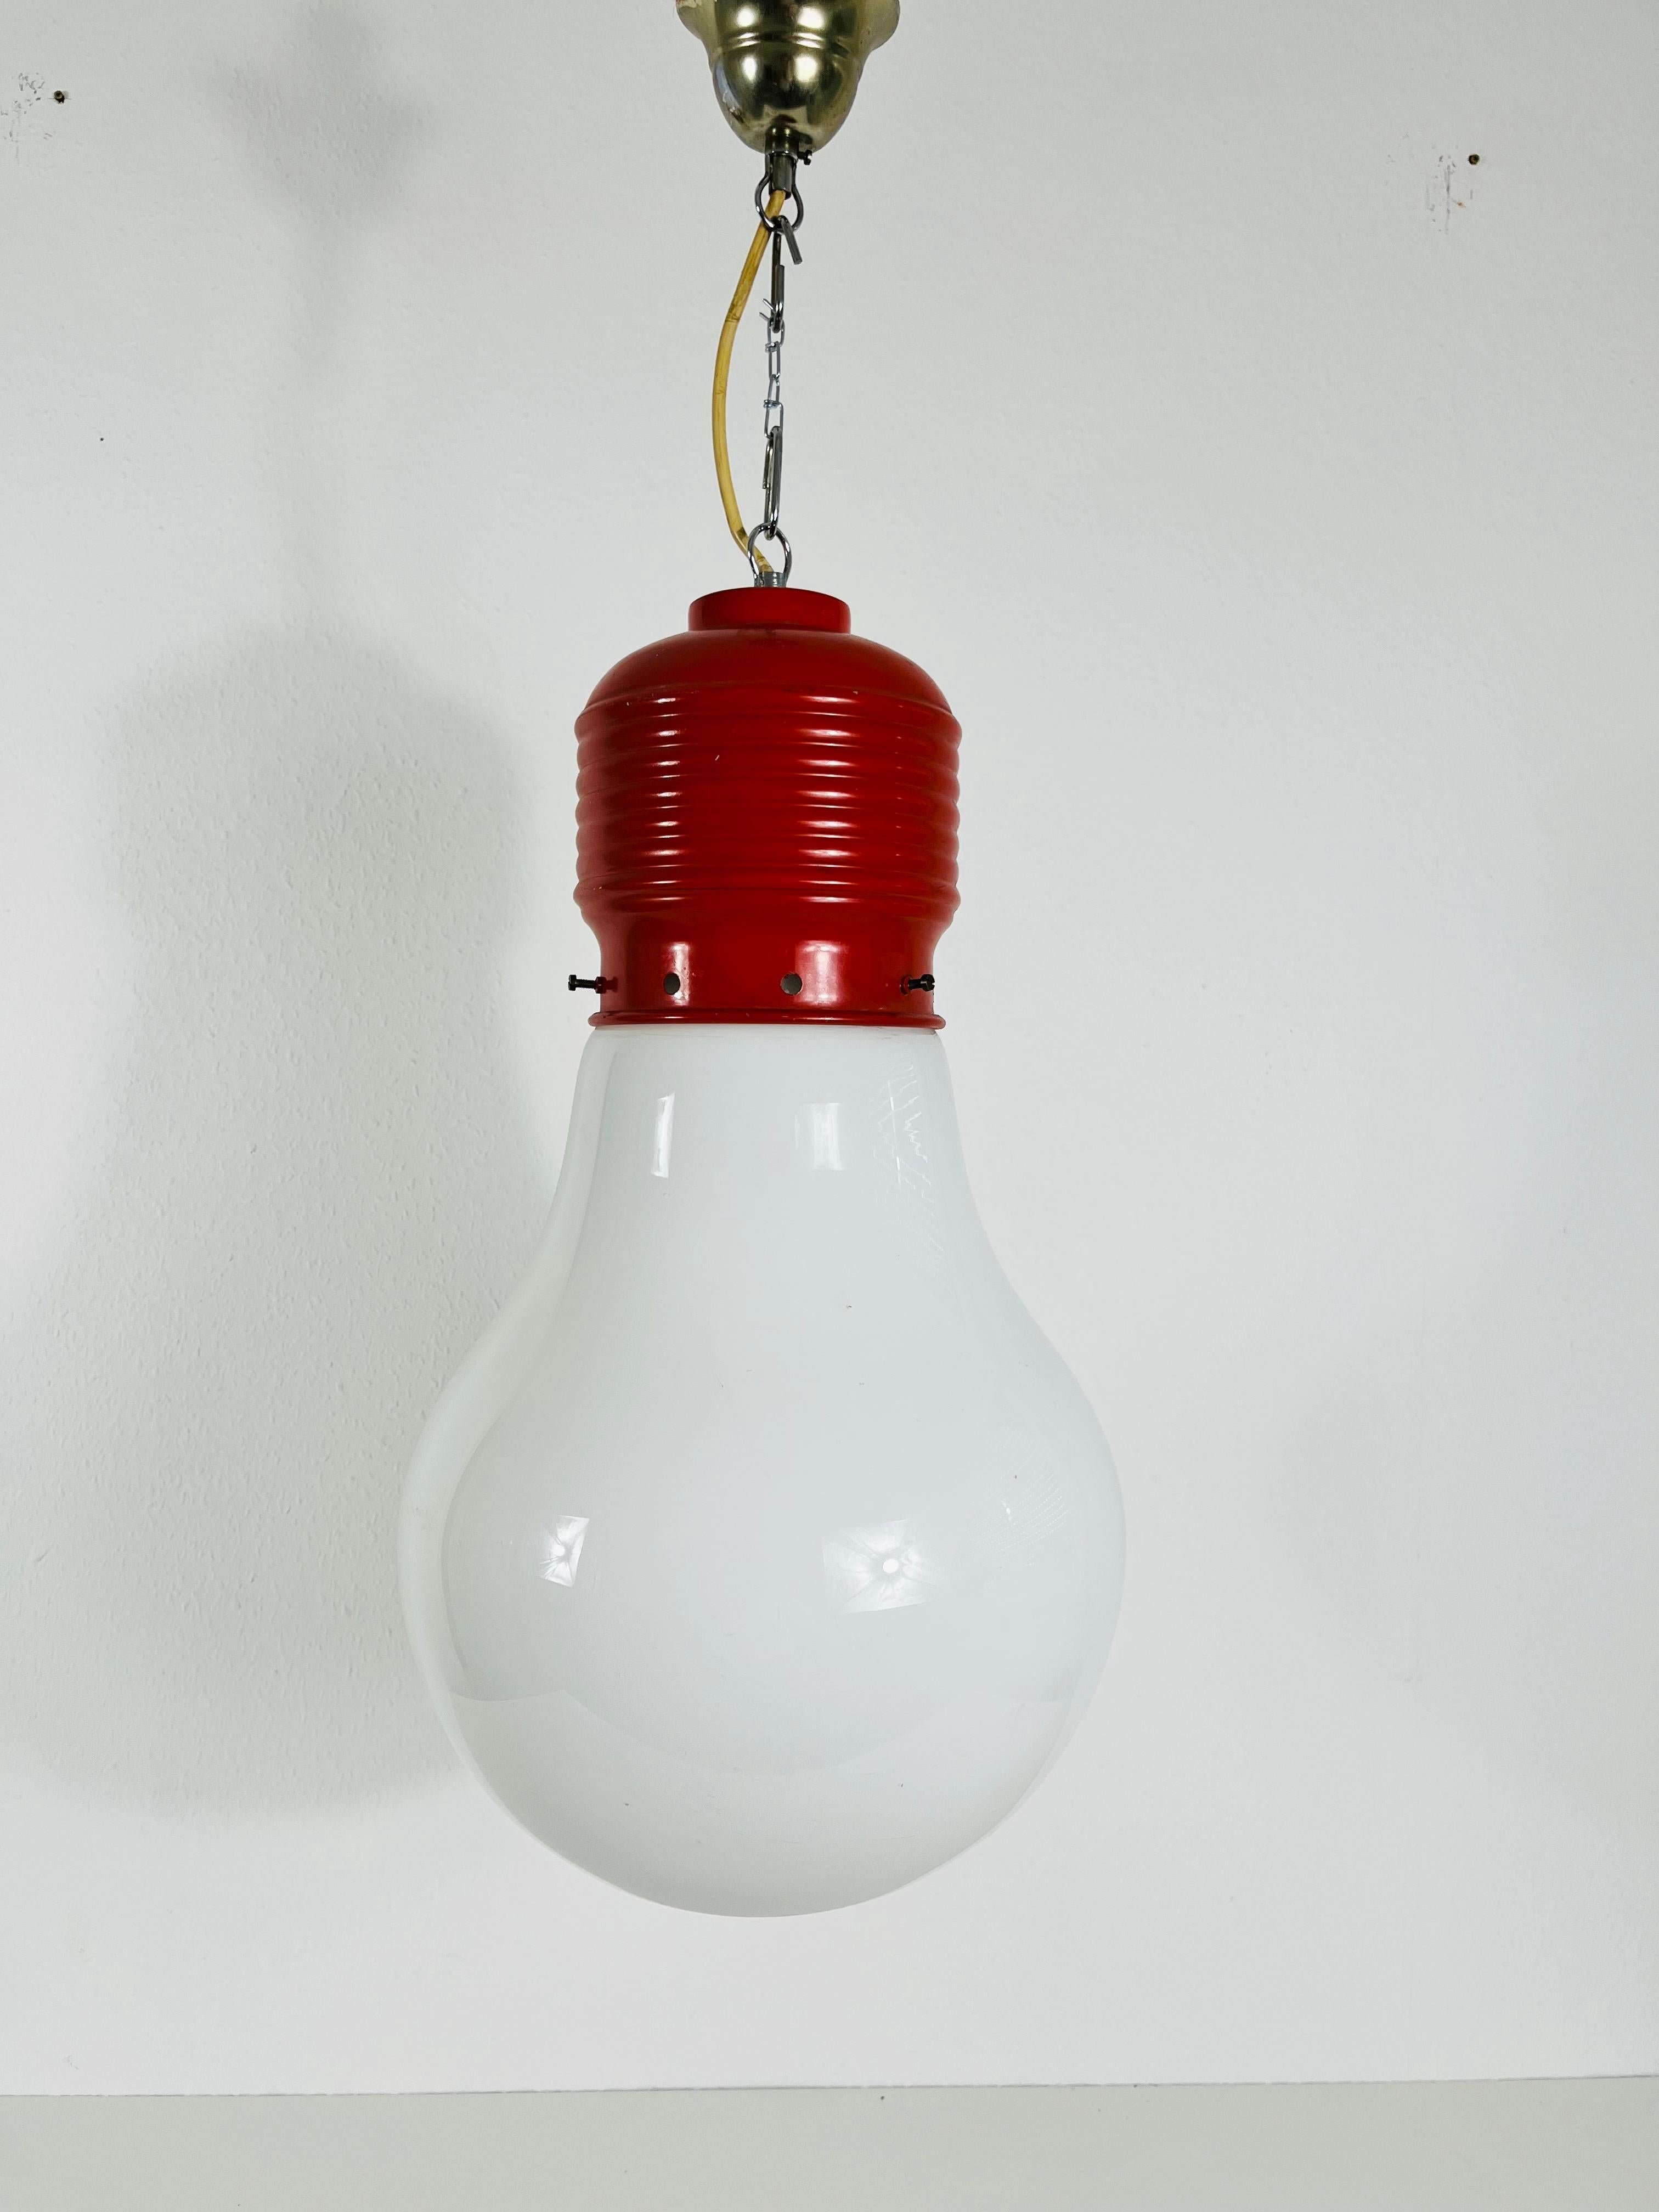 Rare red pendant lamp designed by german designer Ingo Maurer in the 1960s. The lighting has an unique bulb shape, which was characteristic for Ingo Maurer.

The light requires one E27 light bulb. Works with both 220V/120V. Good vintage